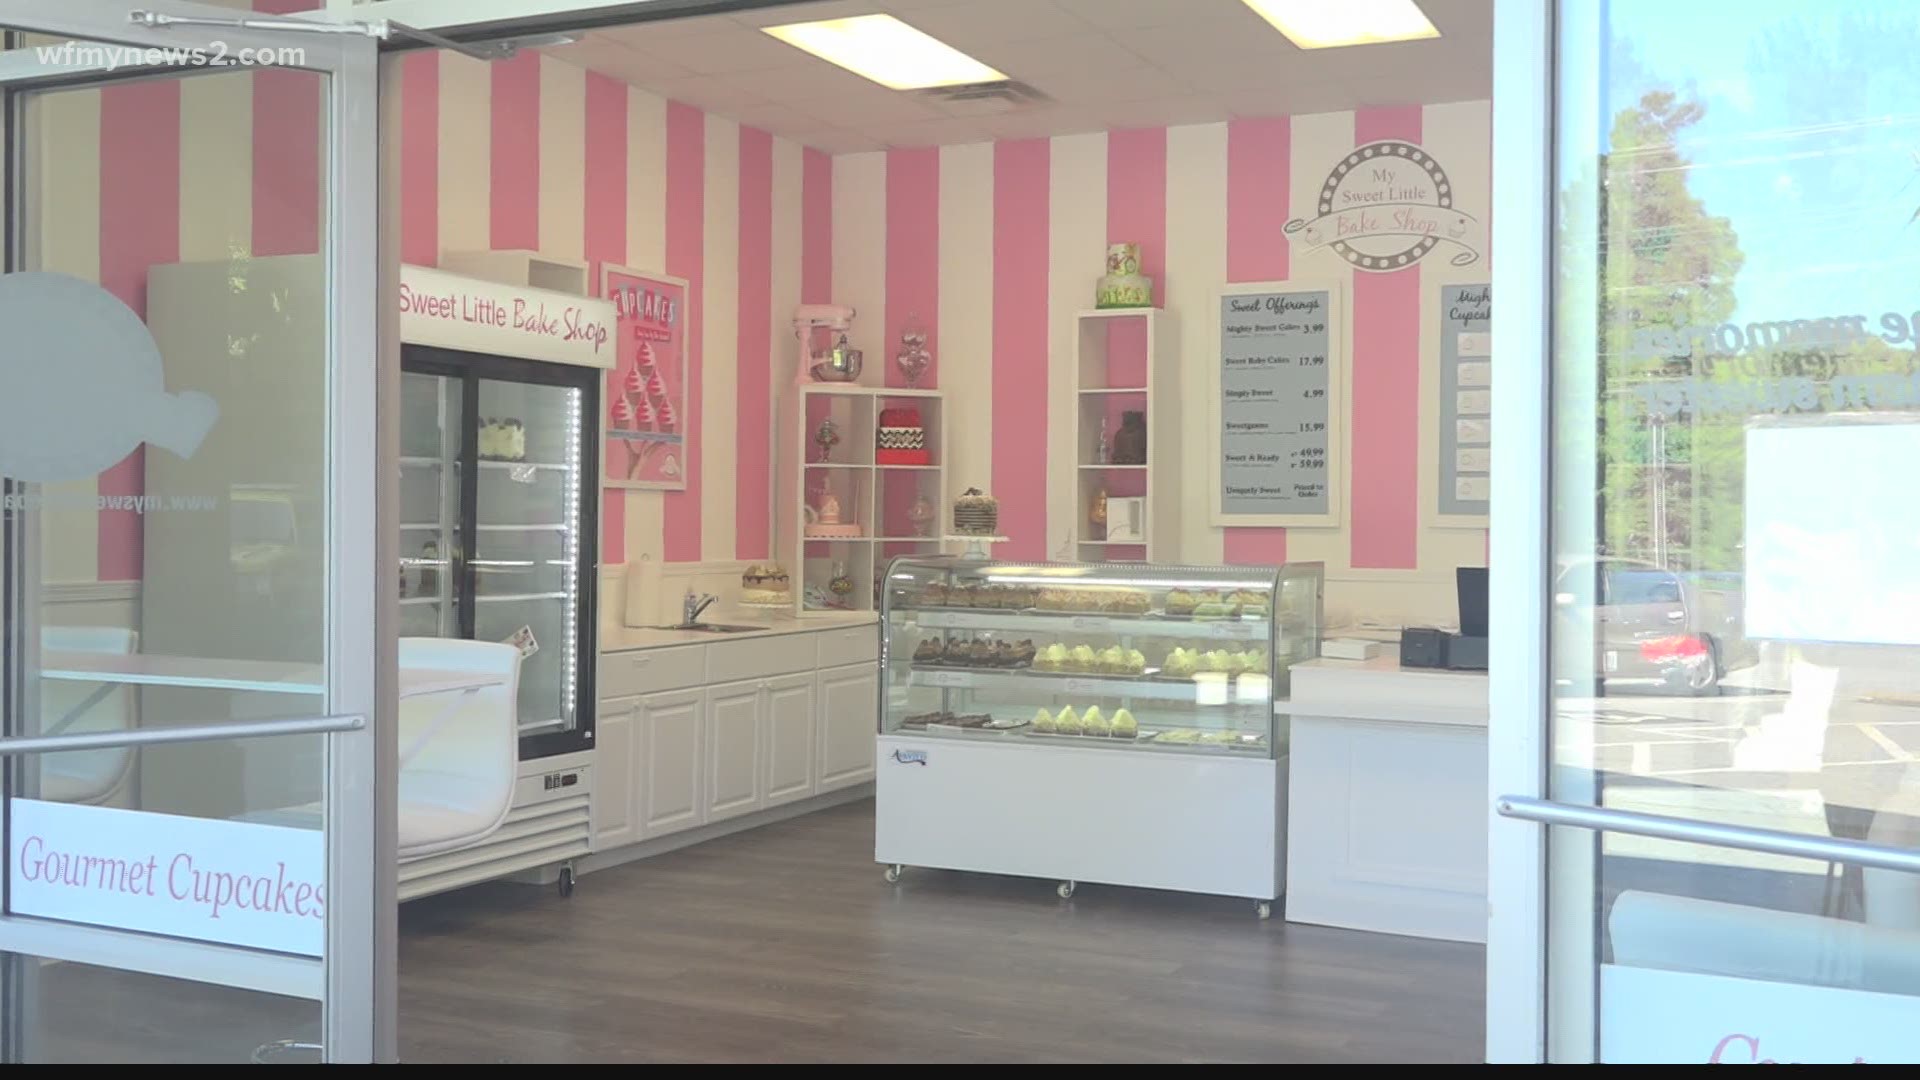 Deedee Williams opened My Sweet Little Bake Shop in early August after moving to Greensboro for a corporate job.